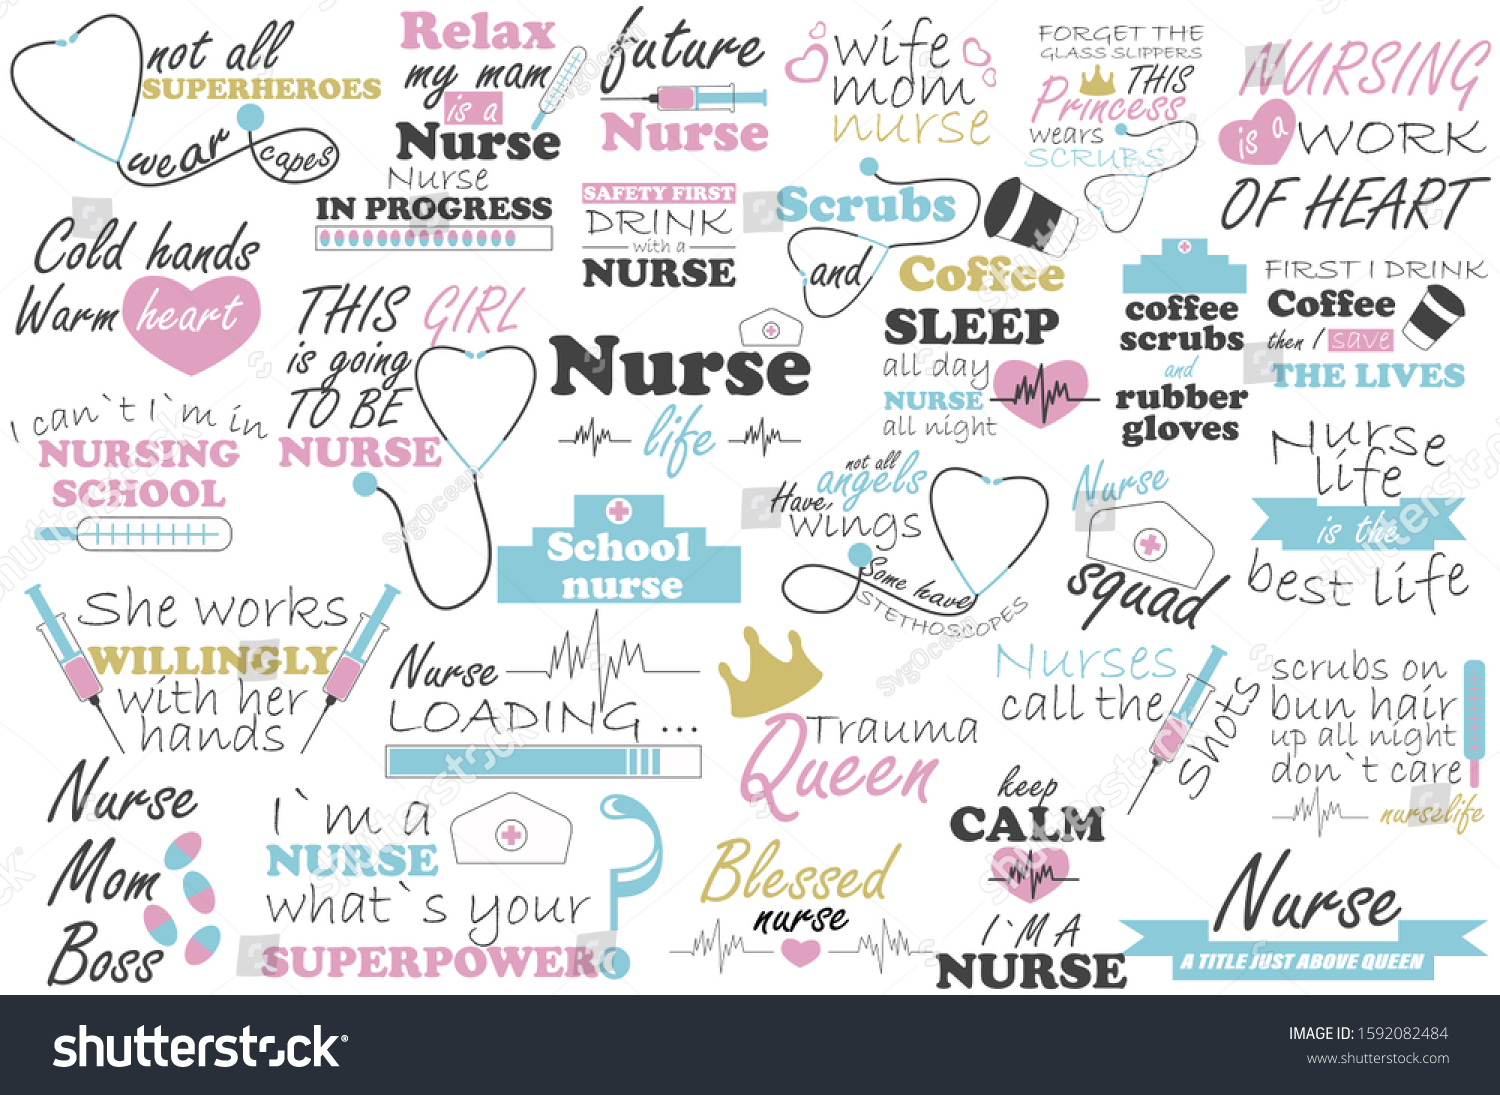 SVG of Nurse vector quote. Medical doctor sayings illustration.  svg